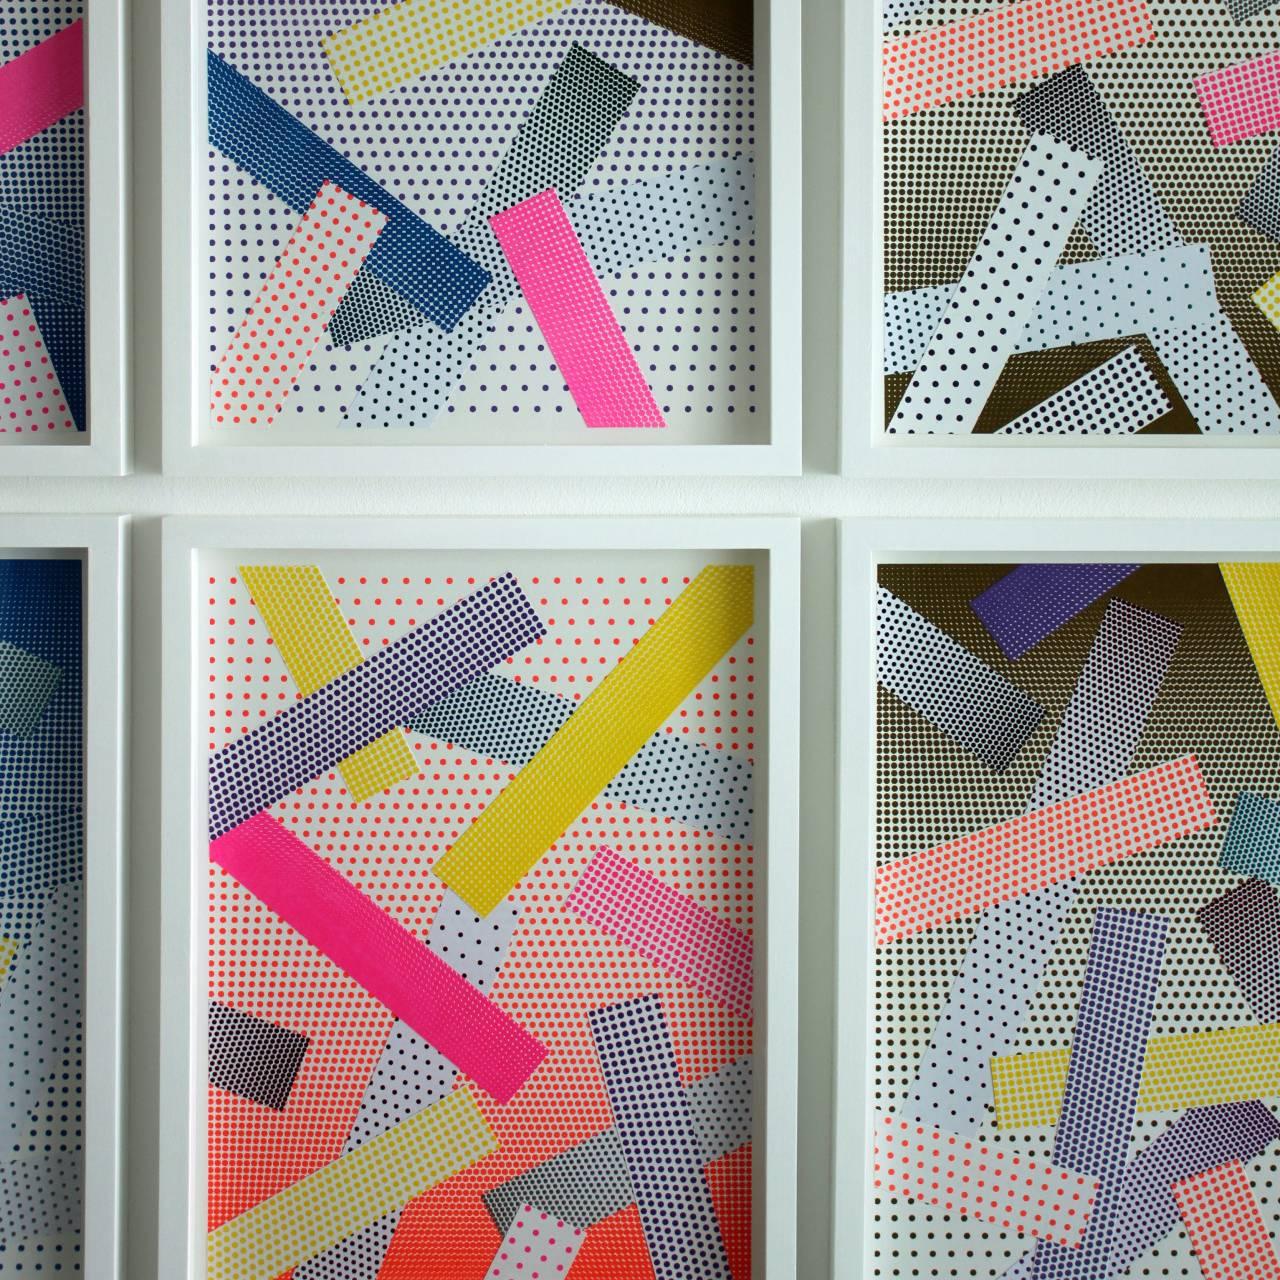 Jason Coburn has meticulously handcrafted a series of colourfully interlaced compositions that make up one entire large-scale installation of 20 framed pieces. Each individual framed work is sold separately — offering both large- and small-scale